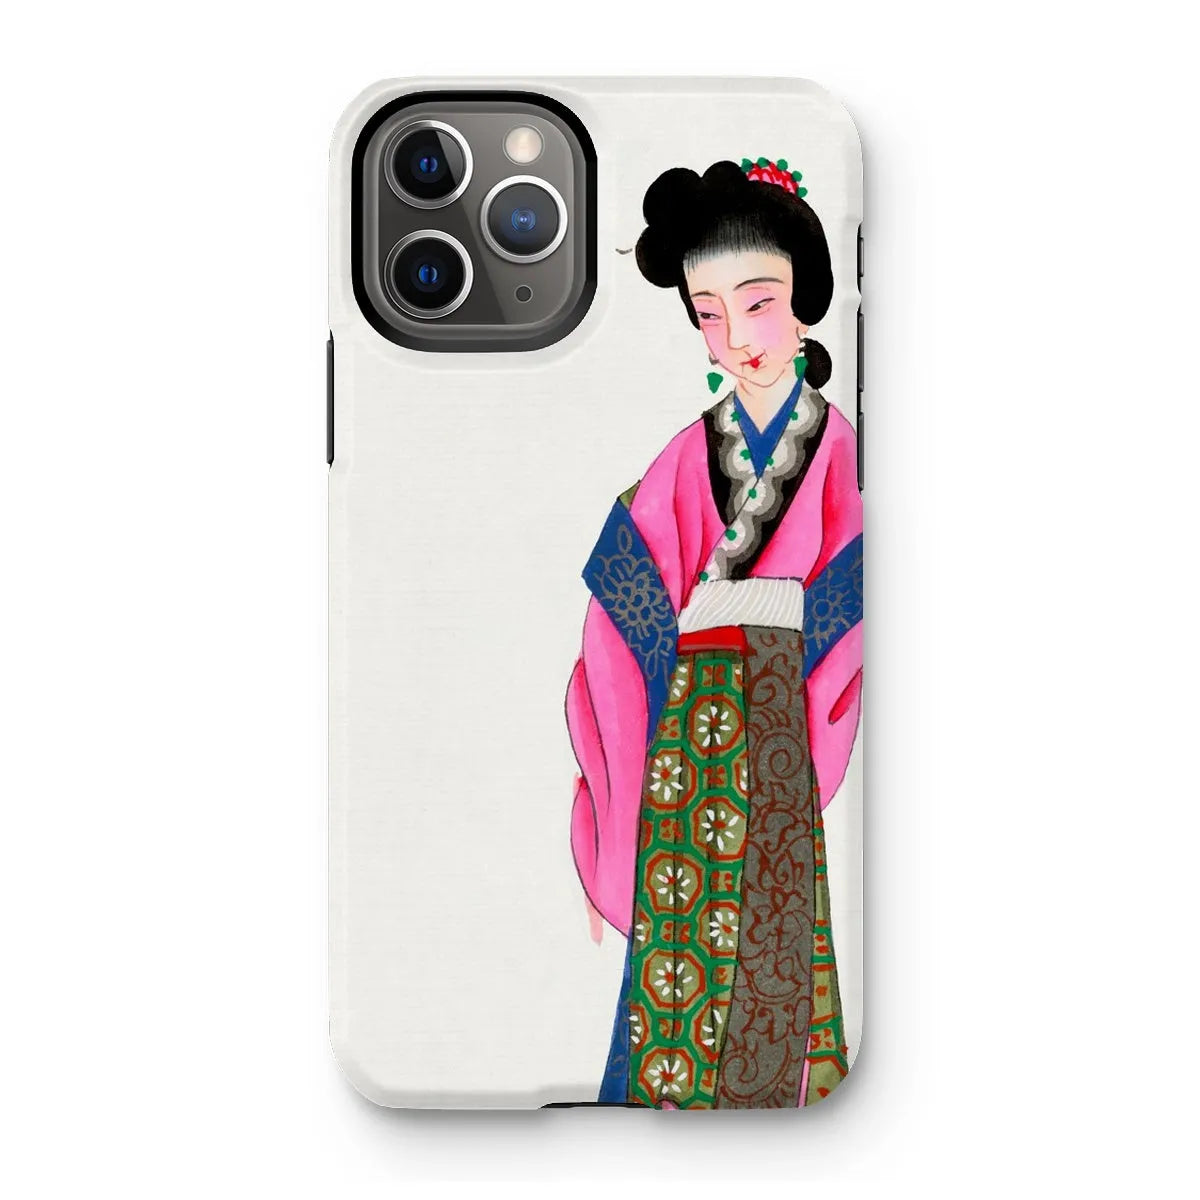 Noblewoman - Chinese Aesthetic Manchu Art Phone Case - Iphone 11 Pro / Matte - Mobile Phone Cases - Aesthetic Art